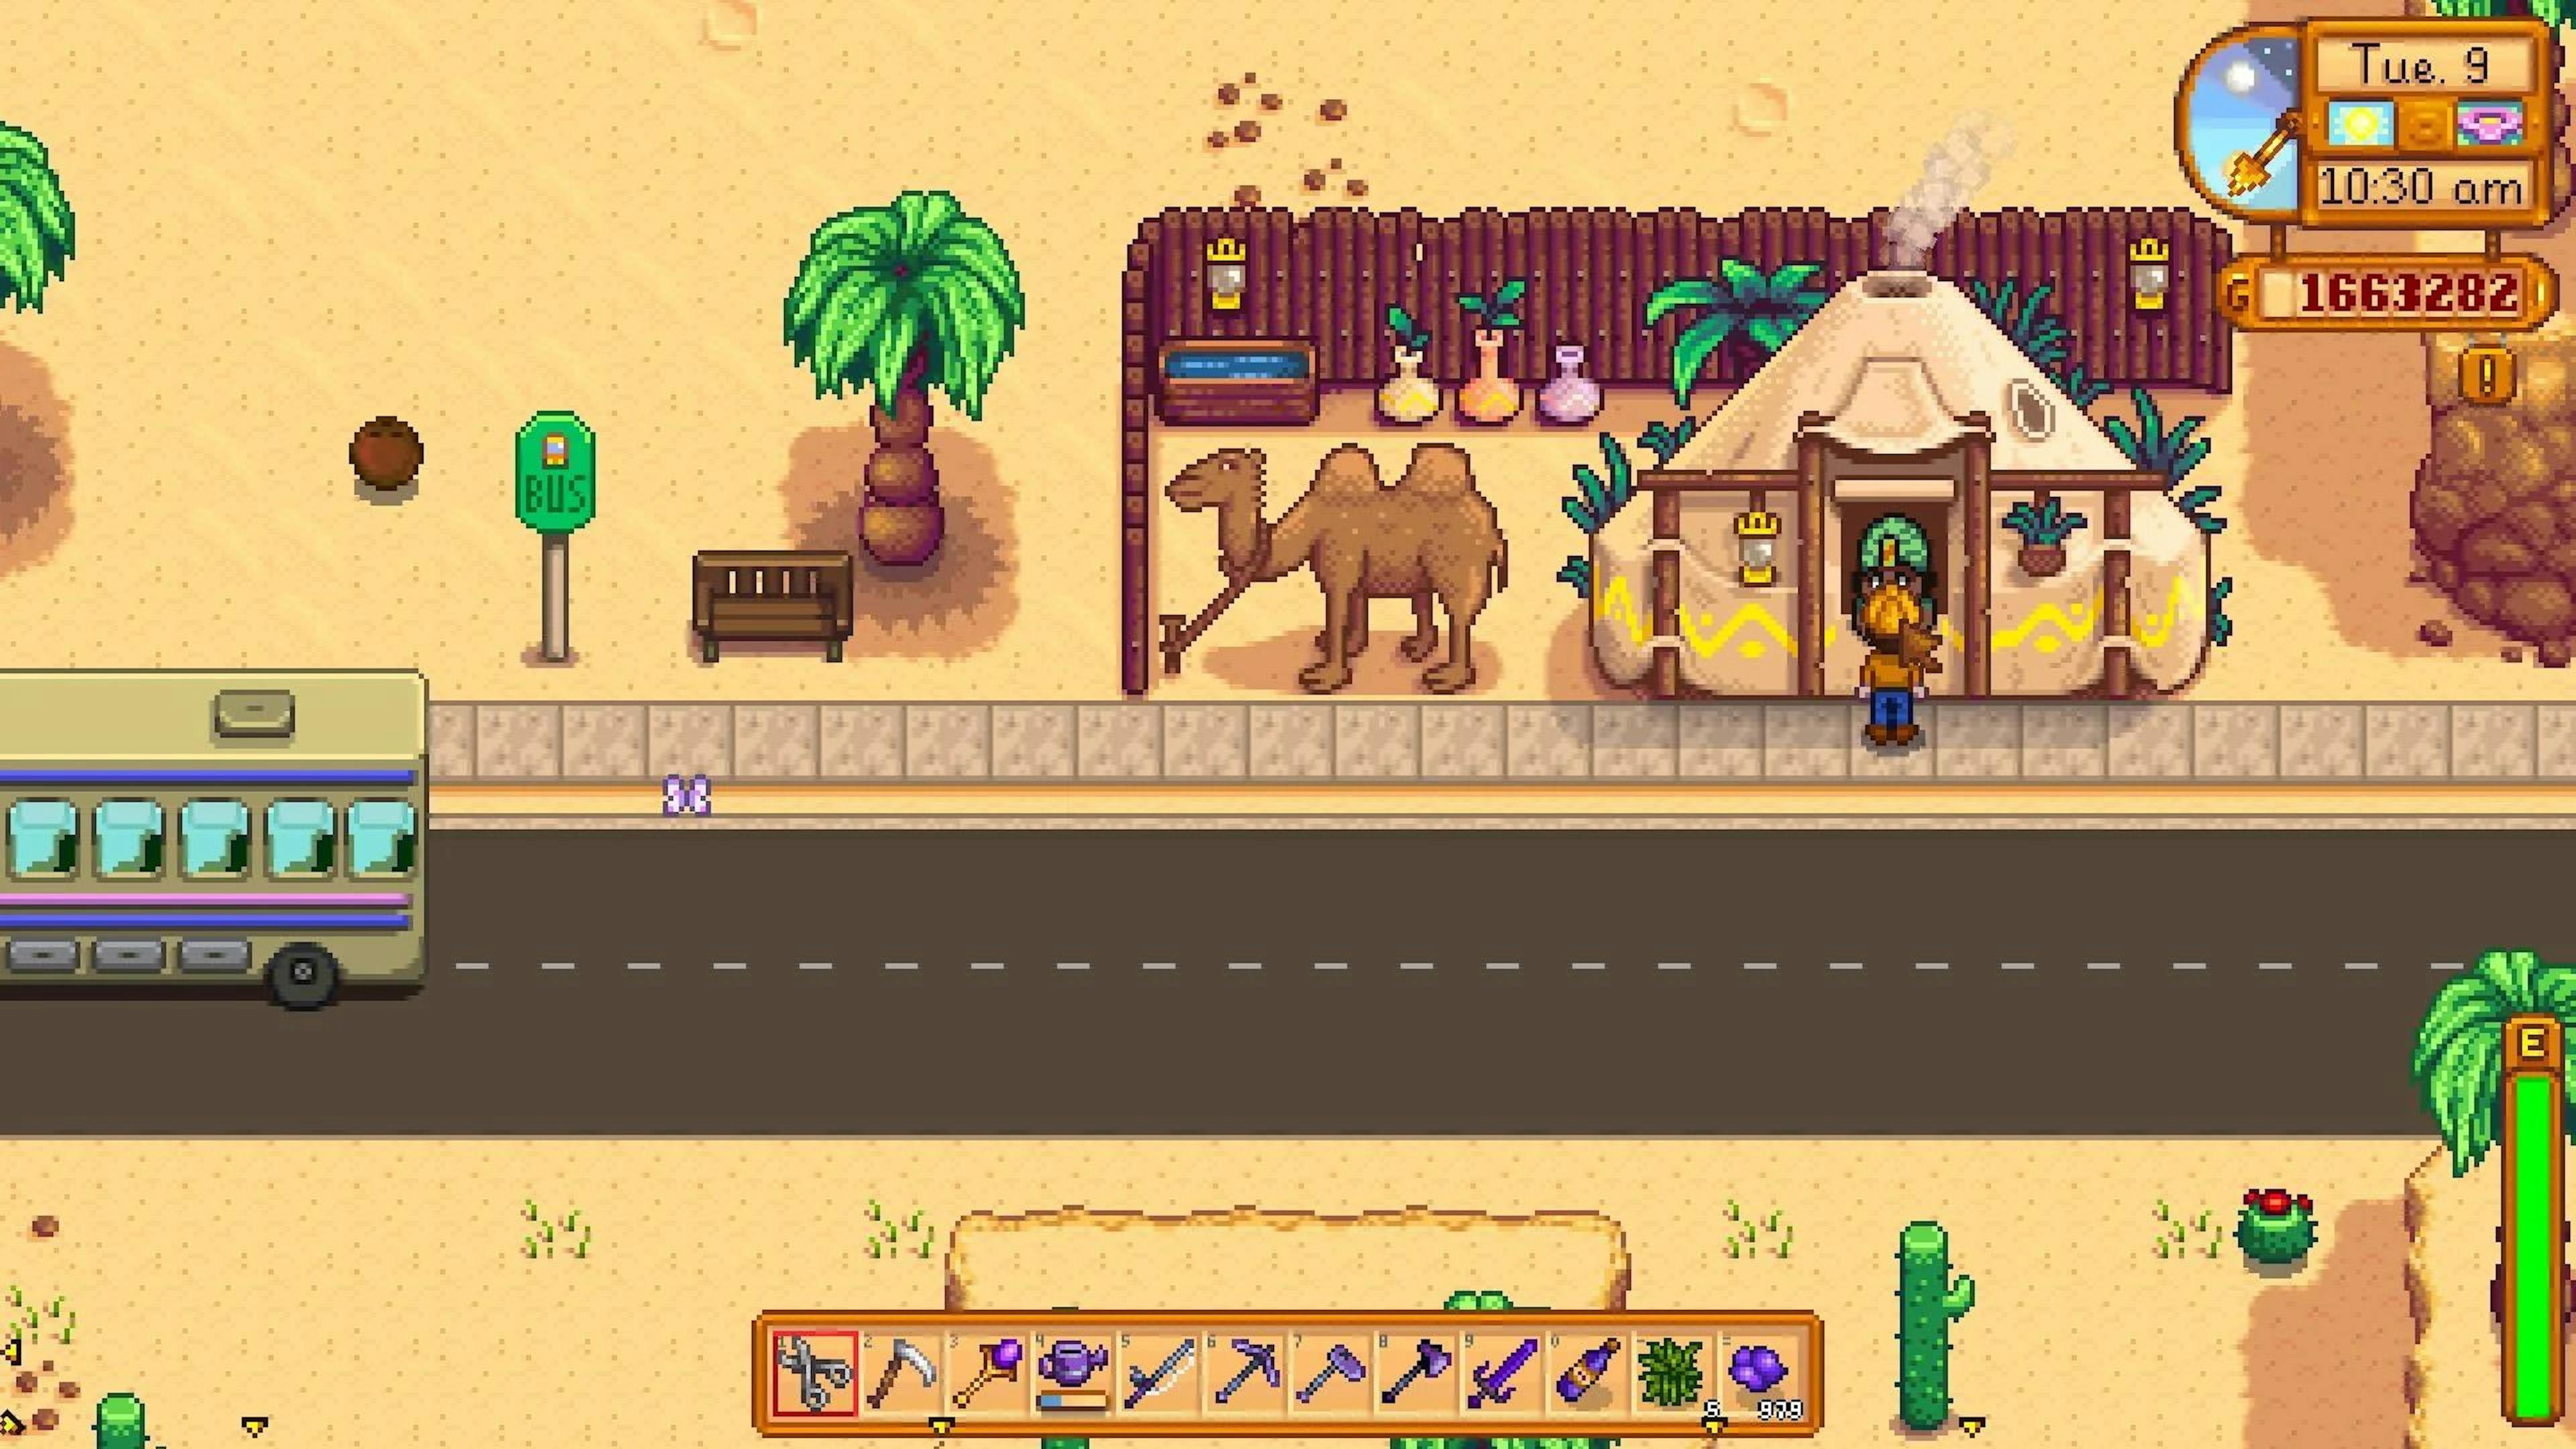 Unlocking and traveling to the desert in Stardew Valley.